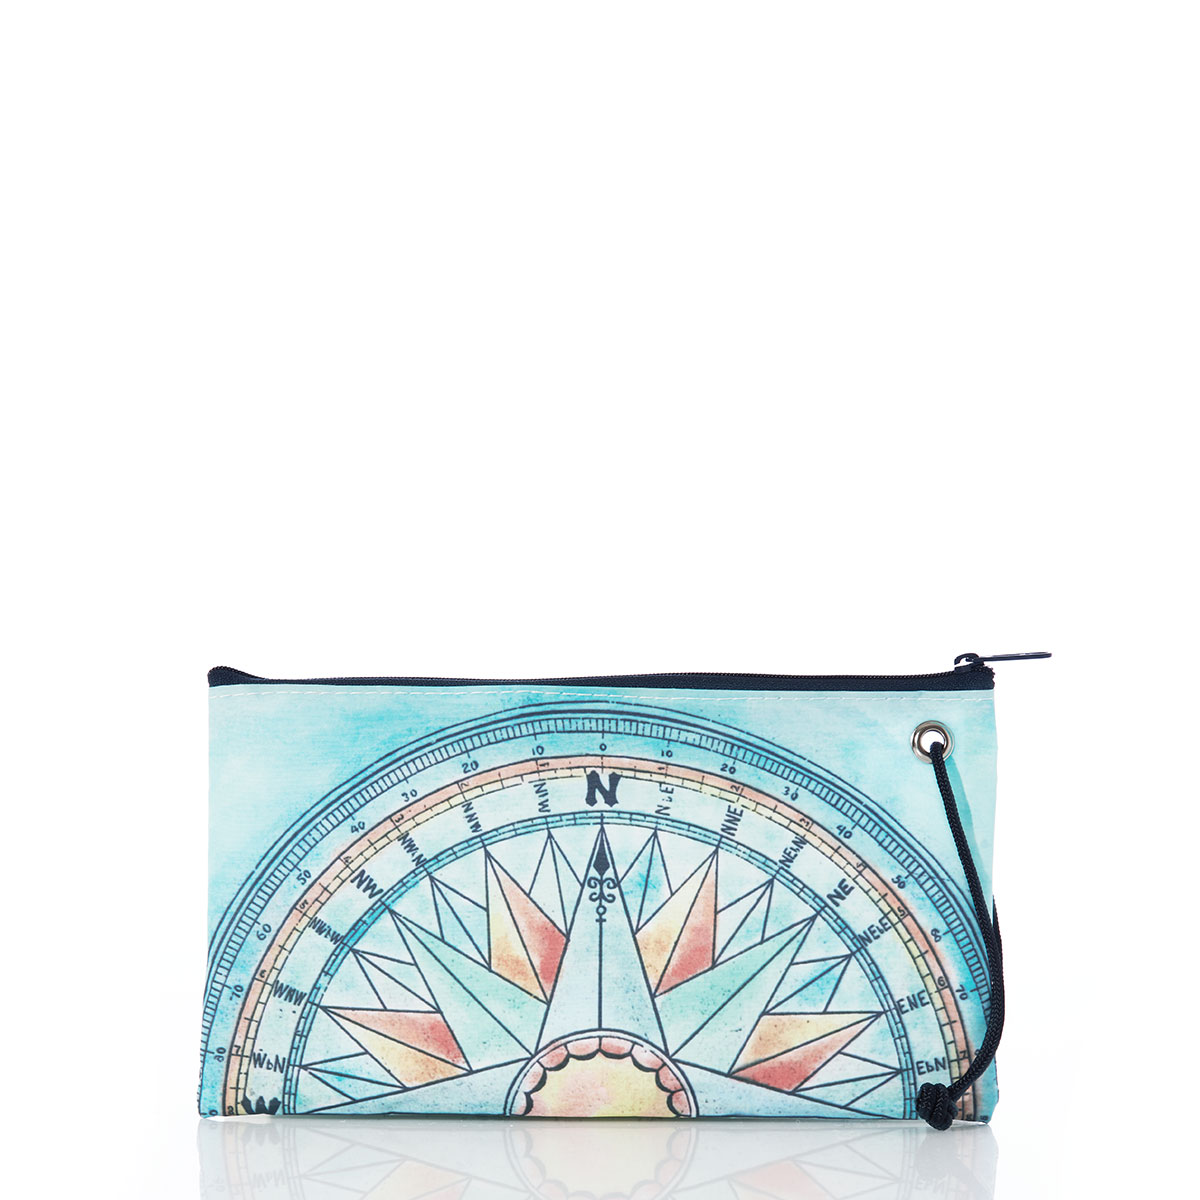 compass rose in bright spring colors printed on a recycled sail cloth large wristlet with navy zipper and wristlet strap